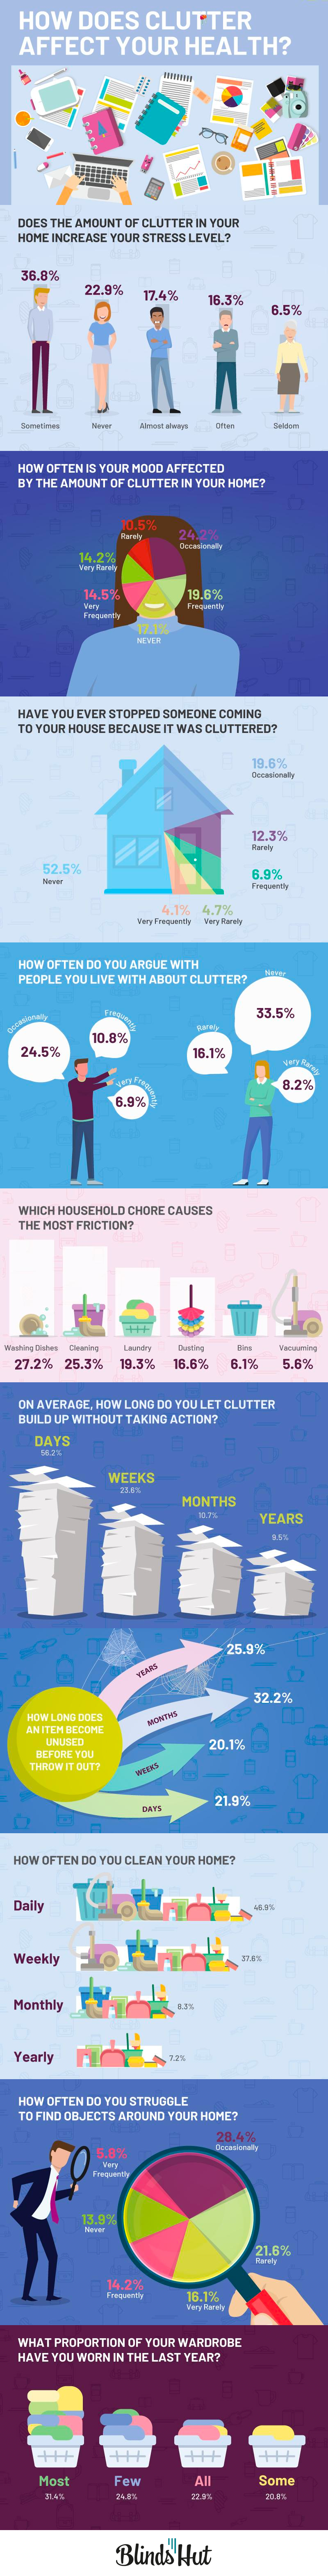 How does Clutter affect your Health? [Infographic] | ecogreenlove